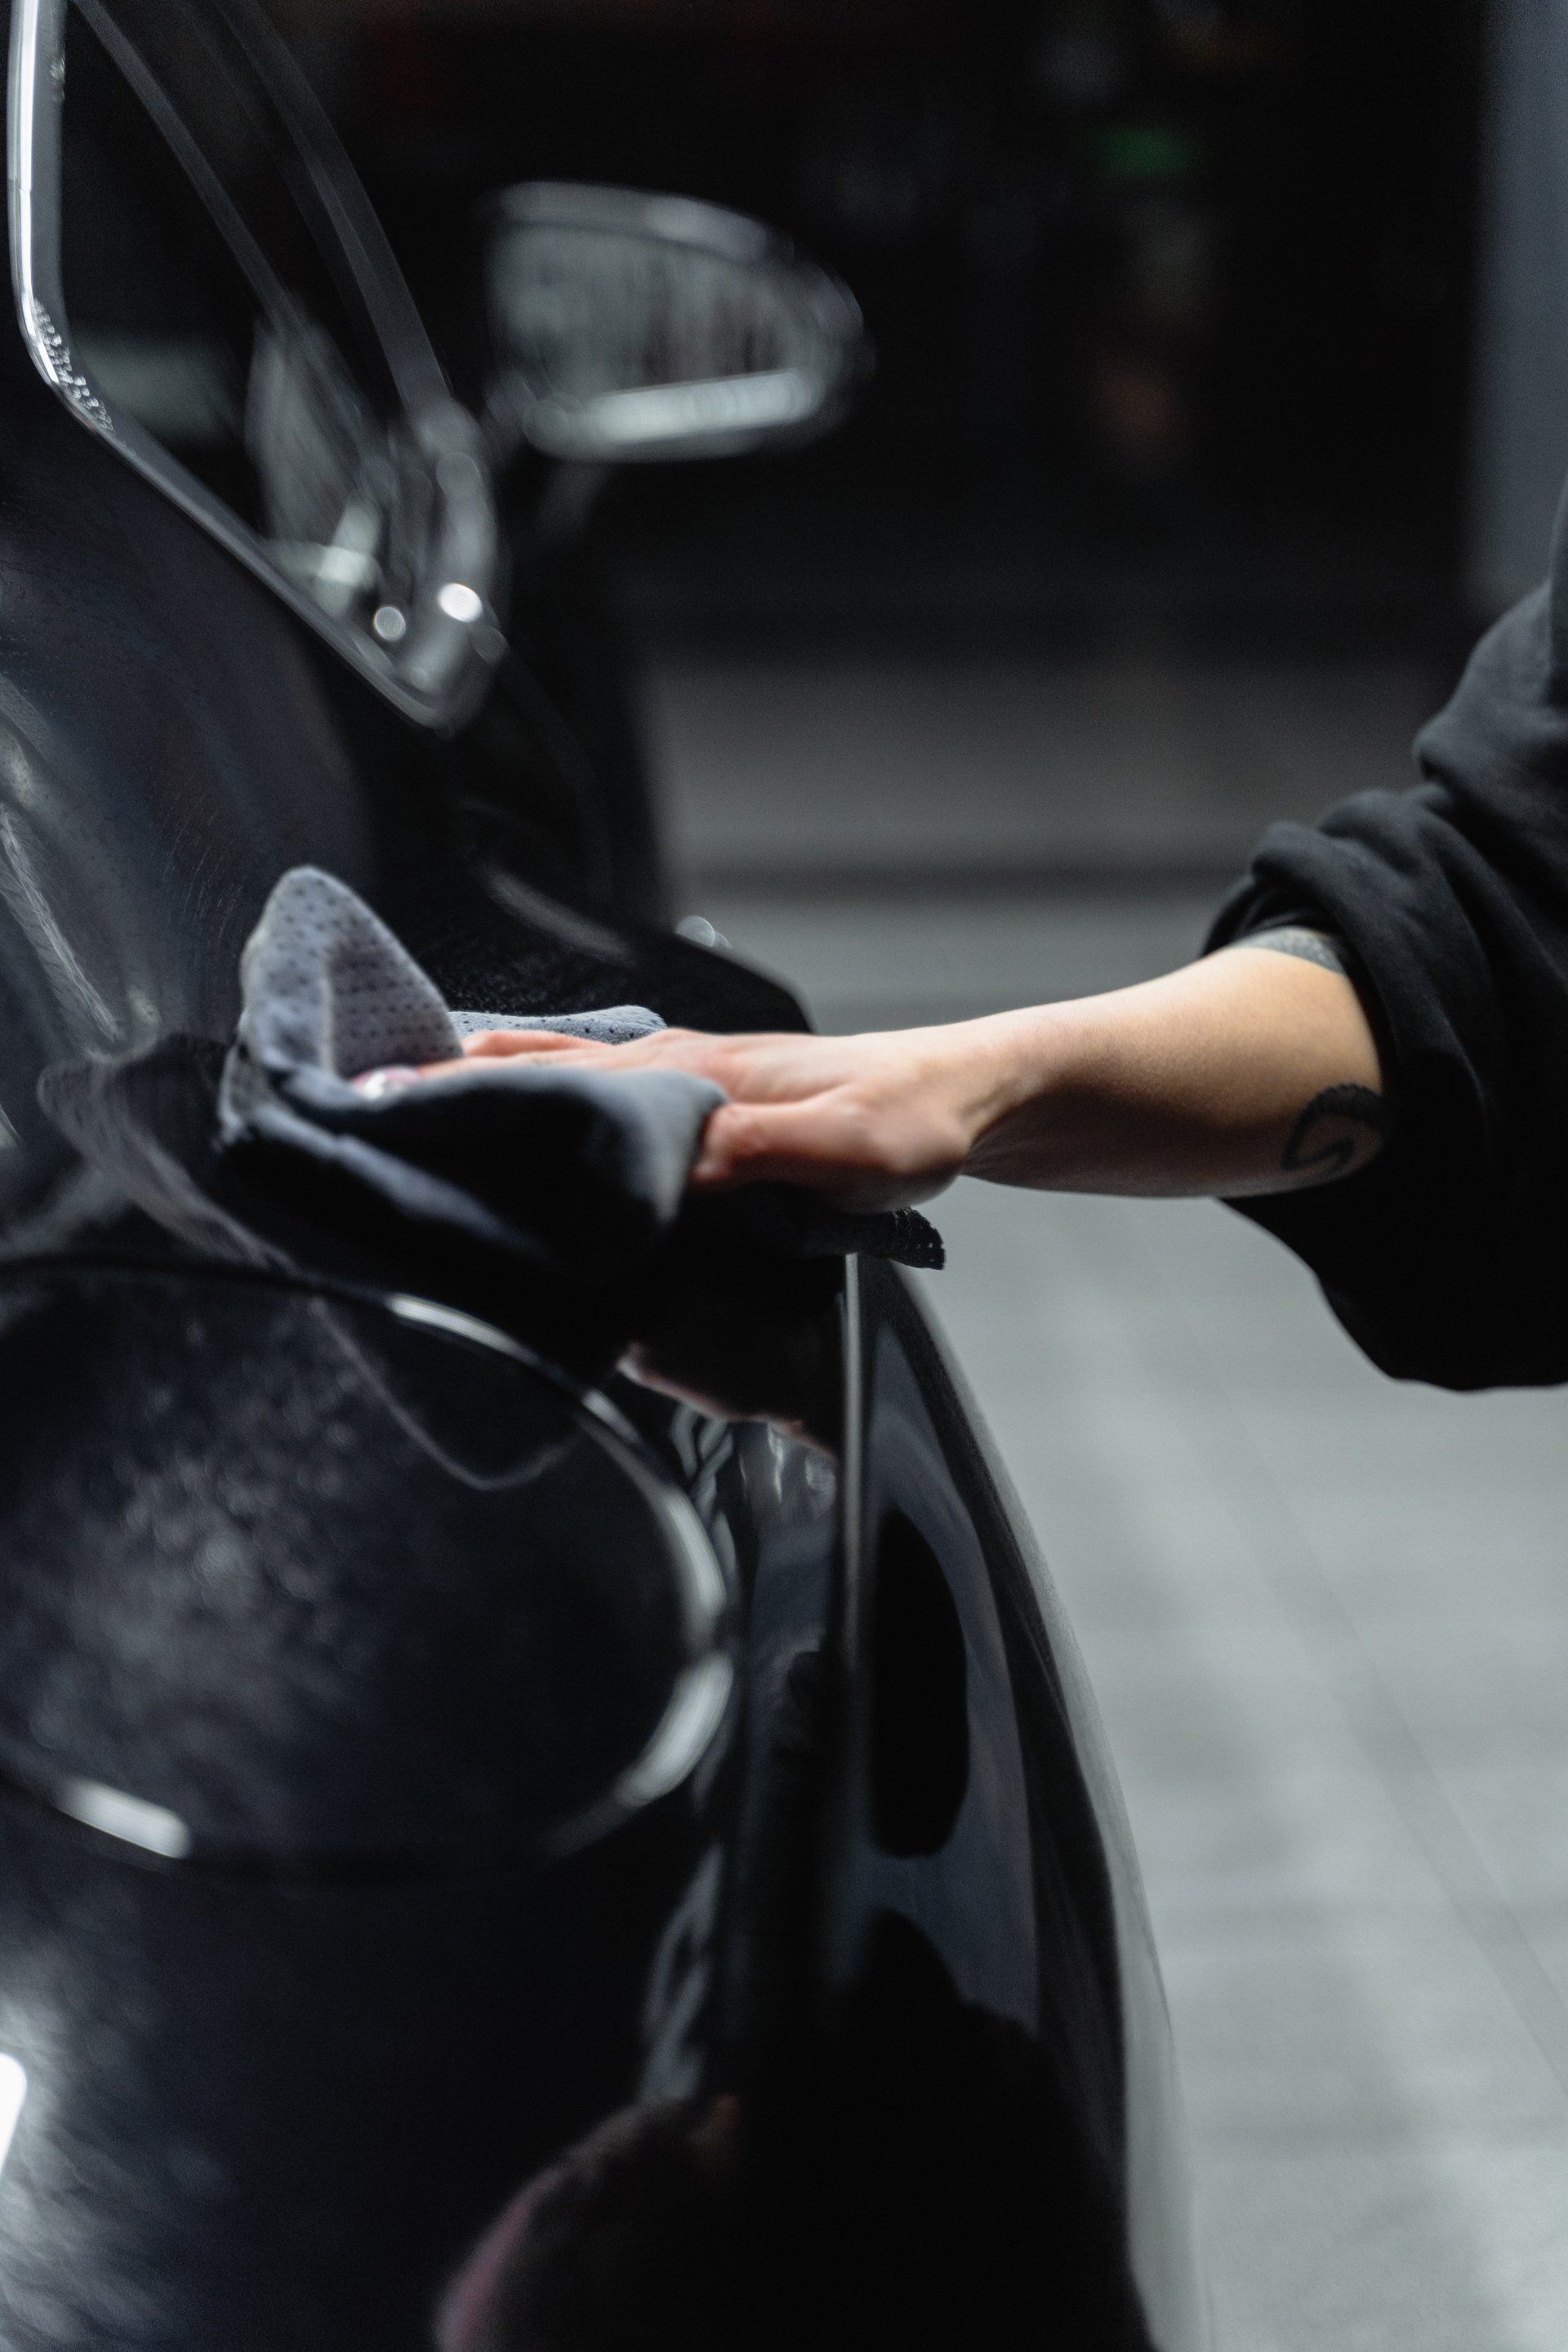 a person is cleaning a black car with a cloth.